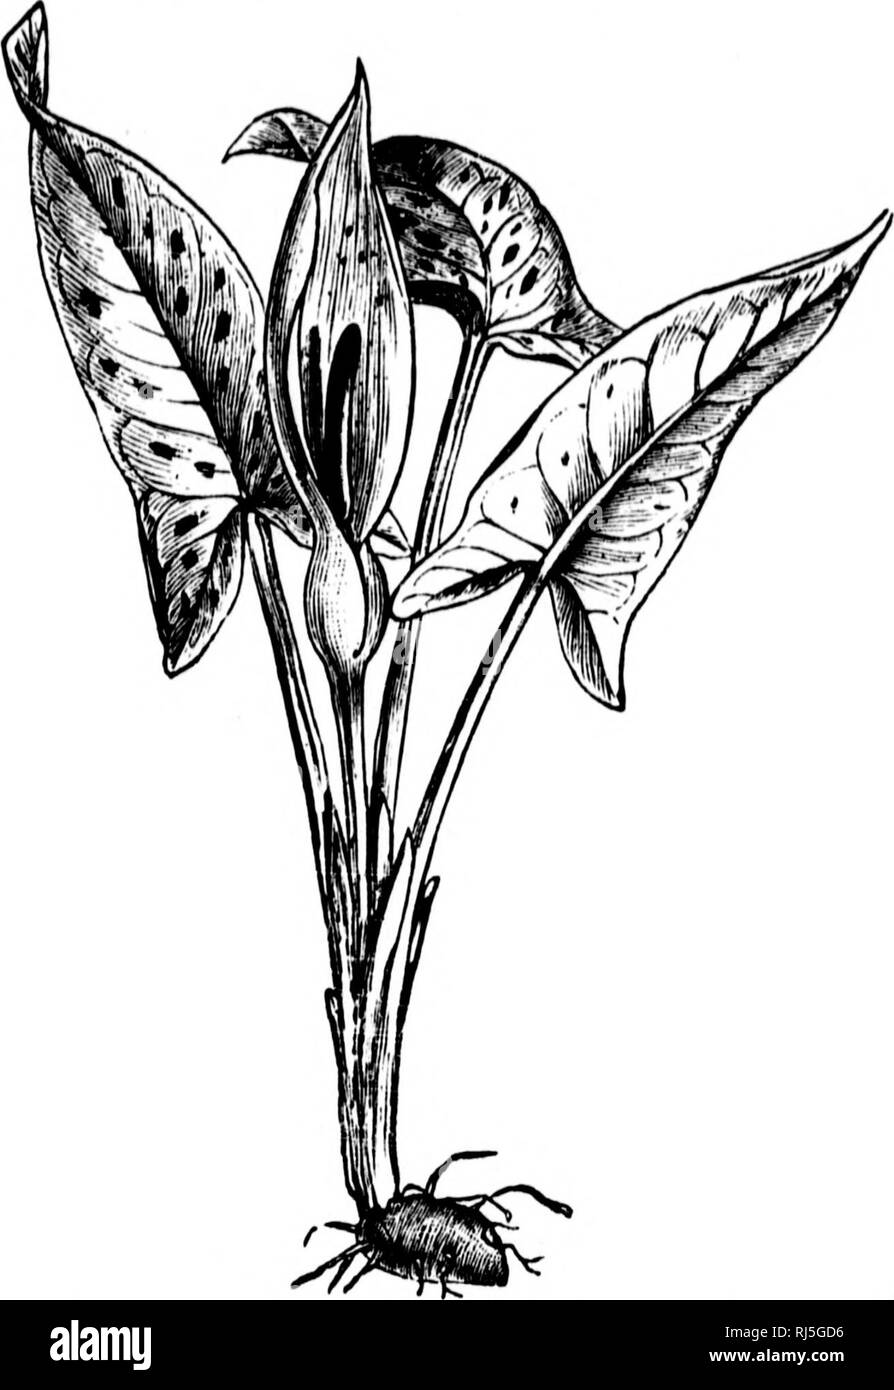 . The story of the plants [microform]. Plants; Botany; Plantes; Botanique. 130 THE STORY OP THE PLANTS. The structure of the cuckoo-pint is very peculiar. What looks like the flower is not really any part of the flower at all, but a large. FIG. 25.—THE COMMON ARUM, OR CUCKOO- PINT, SHOWING THE SPATHE WHICH SUR- ROUNDS THE FLOWERS, AND THE SPIKE STICKING UP IN THE MIDDLE. outer leaf or spathe surrounding a group of very tiny blossoms. You can understand this leaf better if you look at a narcissus stalk, where. Please note that these images are extracted from scanned page images that may have be Stock Photo